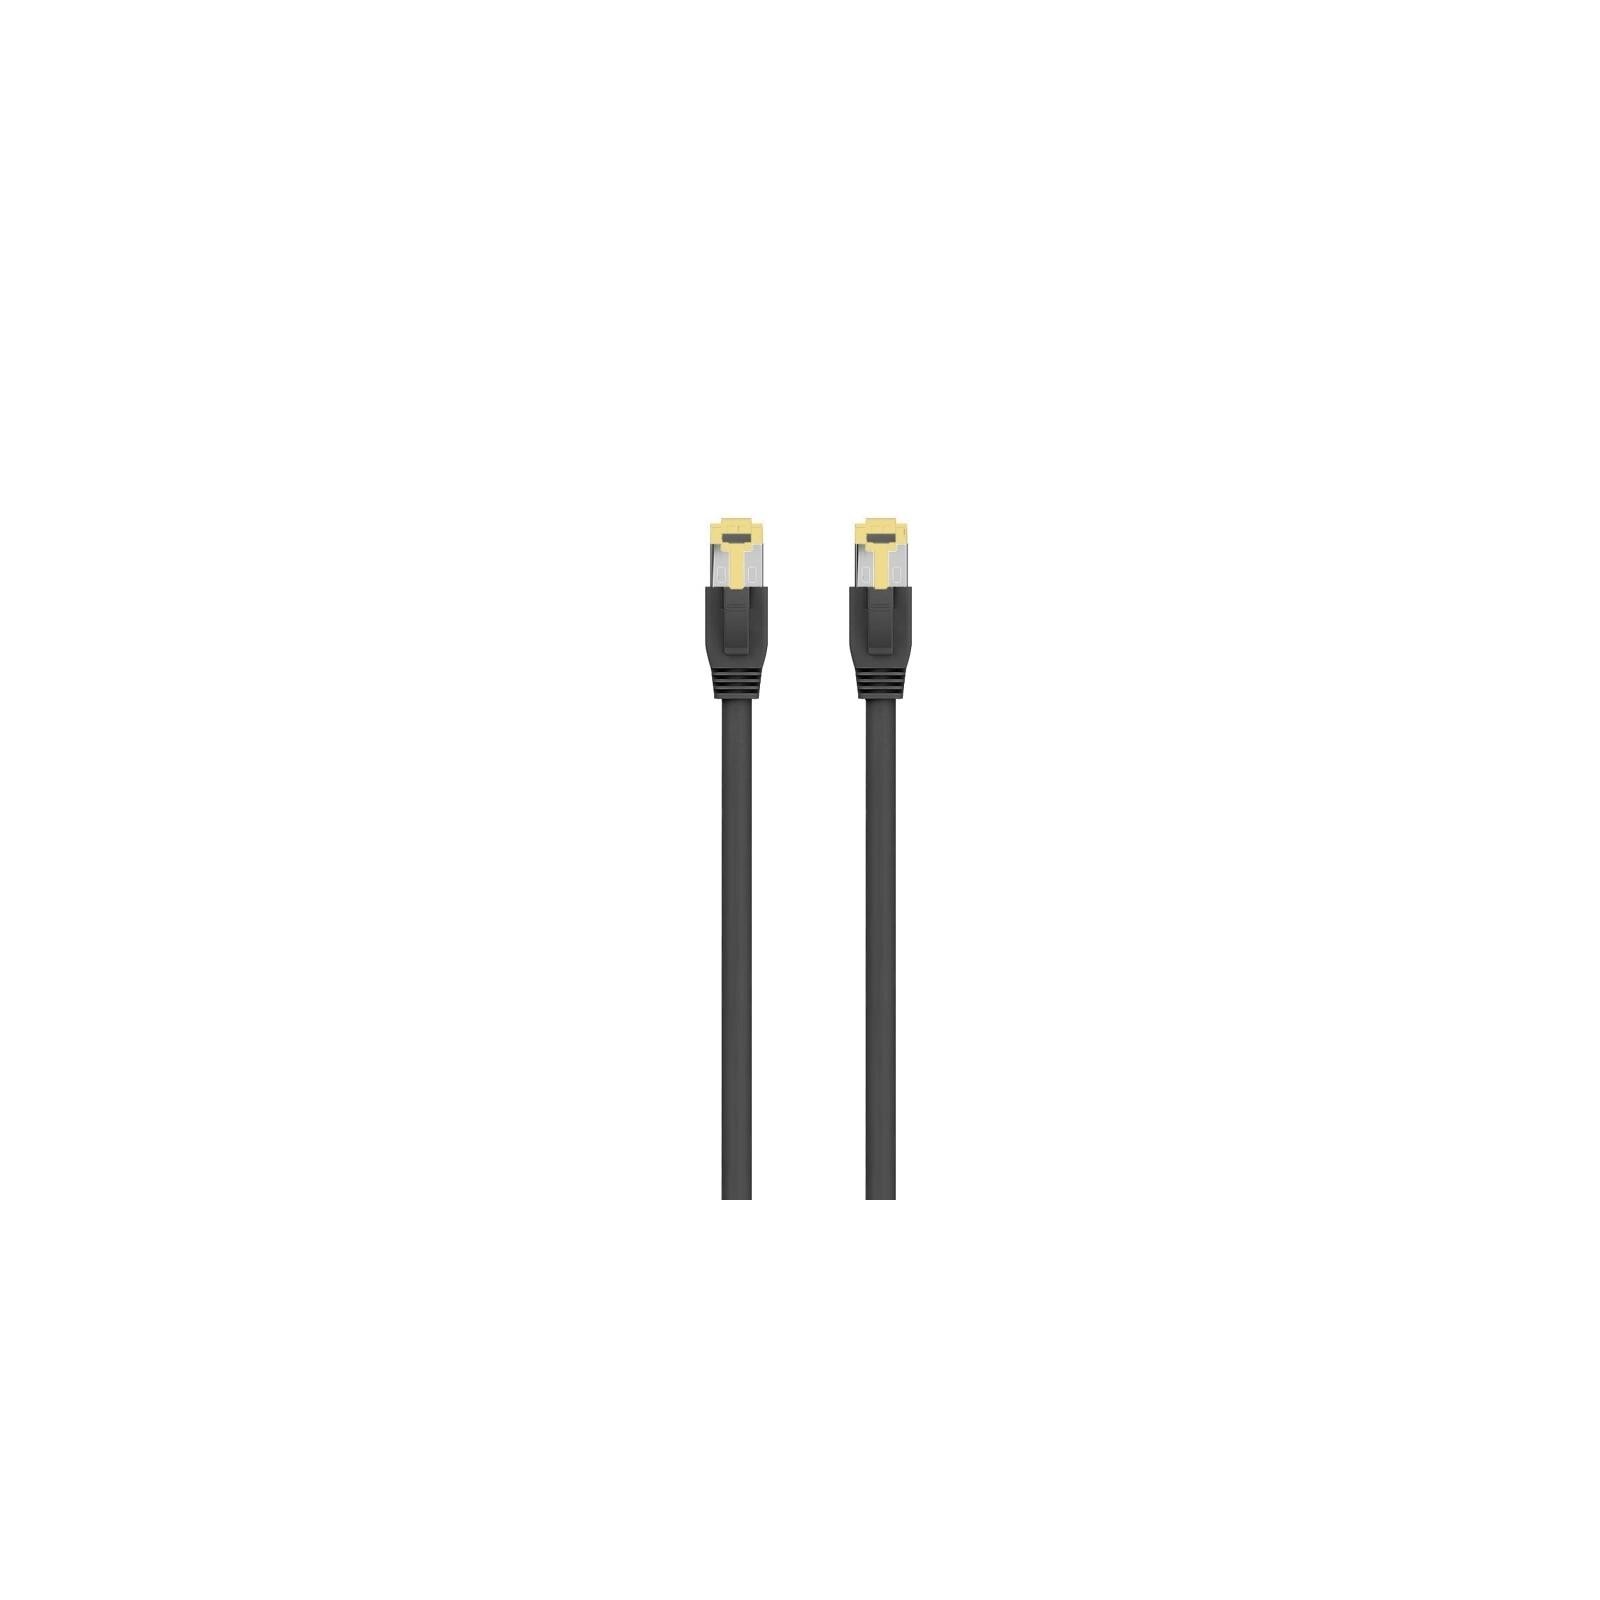 Ewent Cable Cat. 8.1 S/Ftp,Awg26/7, Cu, Lszh,10M